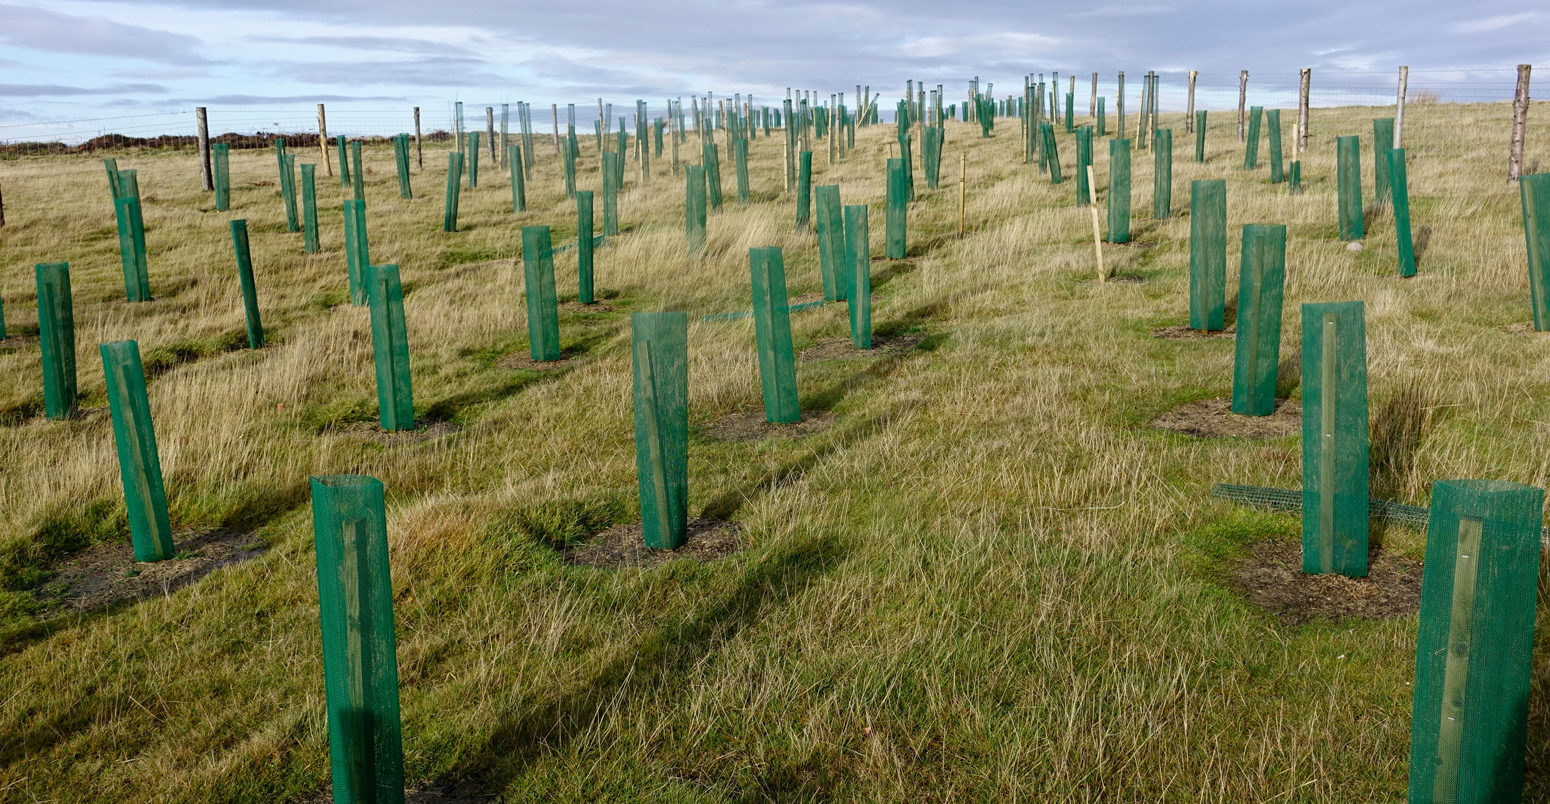 A new plantation of fir trees on the North Yorkshire Moors